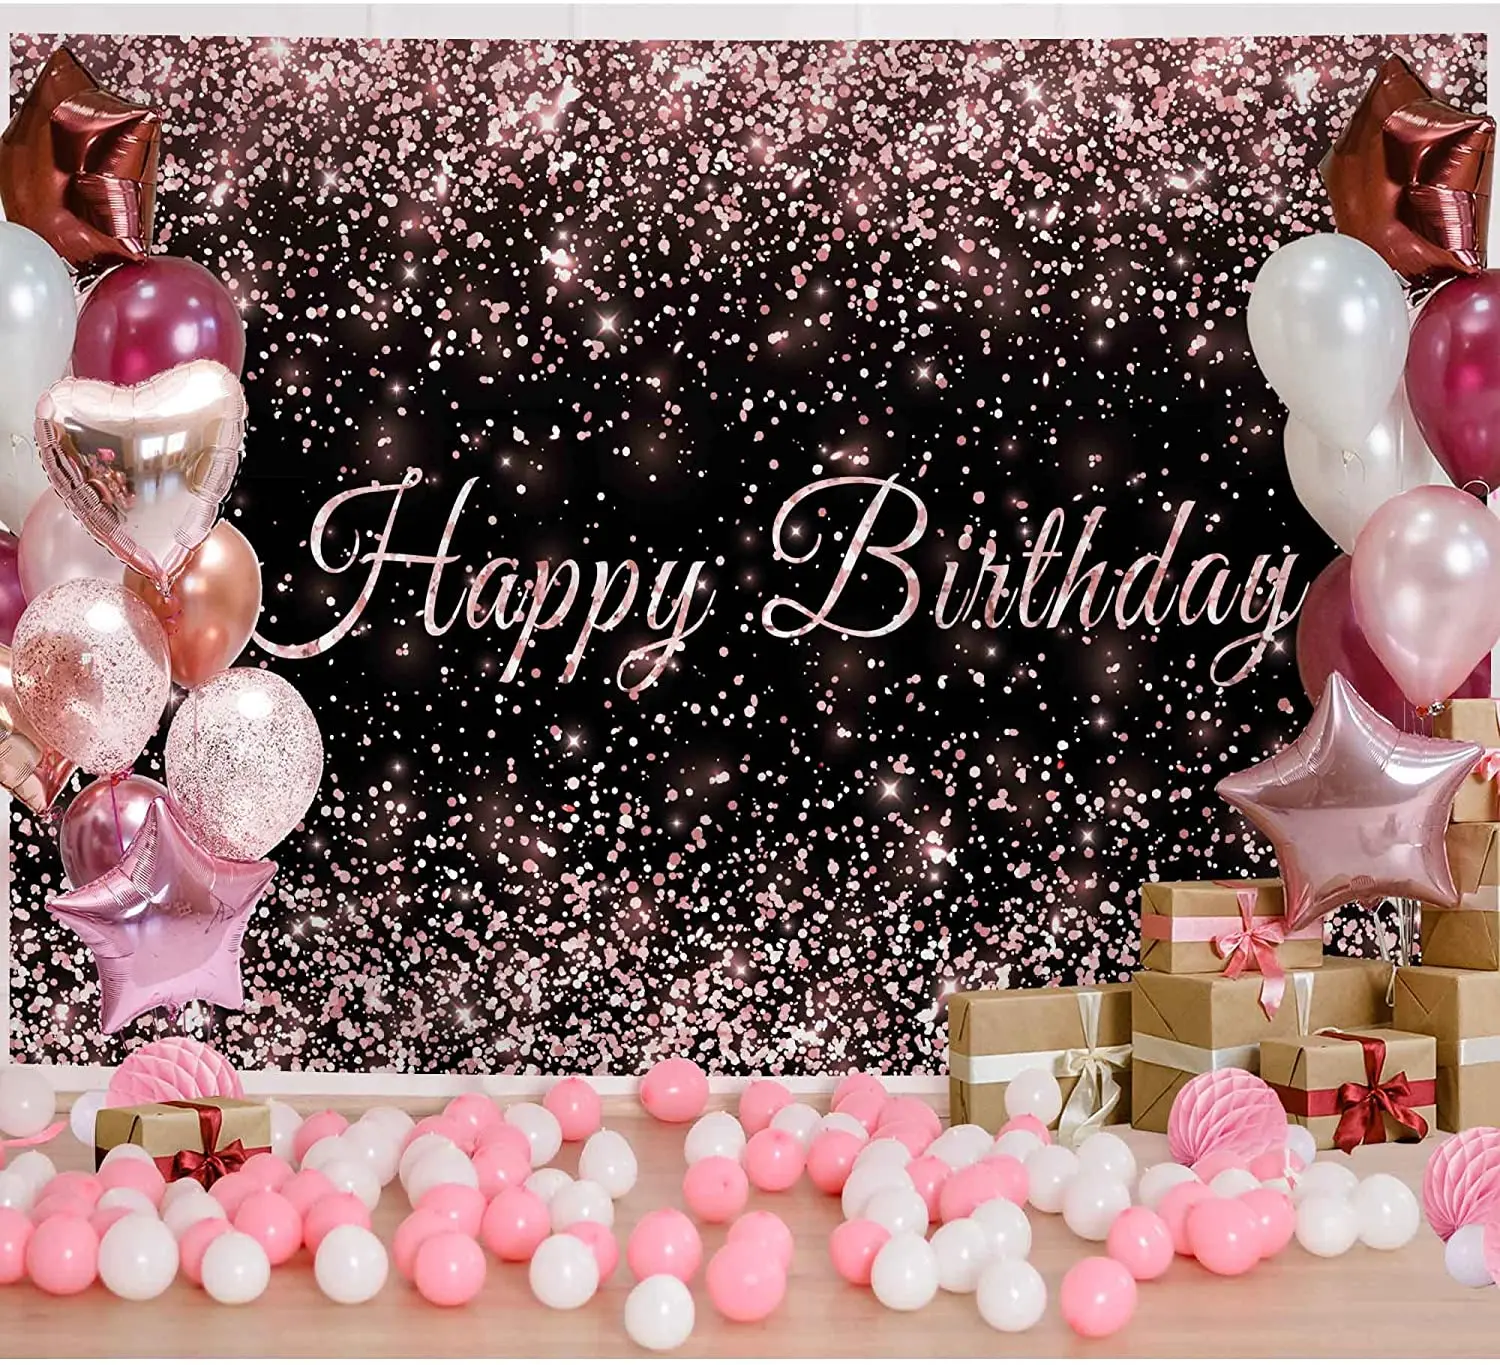 Birthday Cake Pink High Shiny Adorned with Shiny Beads Cut into Pieces of  Men`s Hands Stock Photo - Image of knife, holiday: 100254214